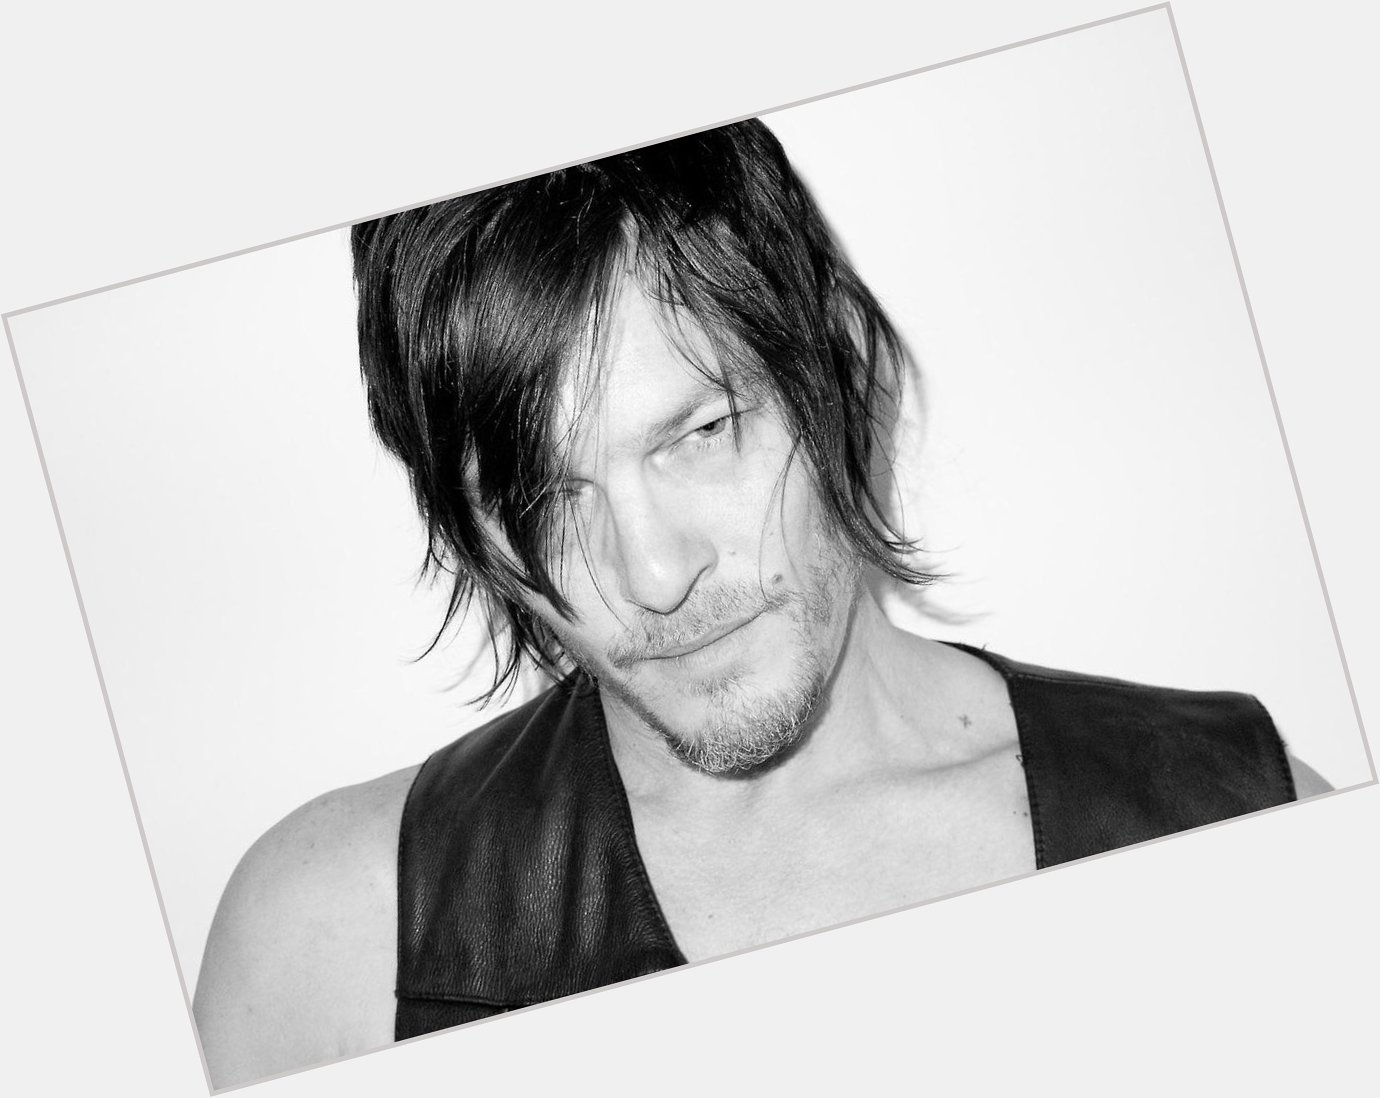 Happy birthday to our favorite zombie hunter, Norman Reedus! 